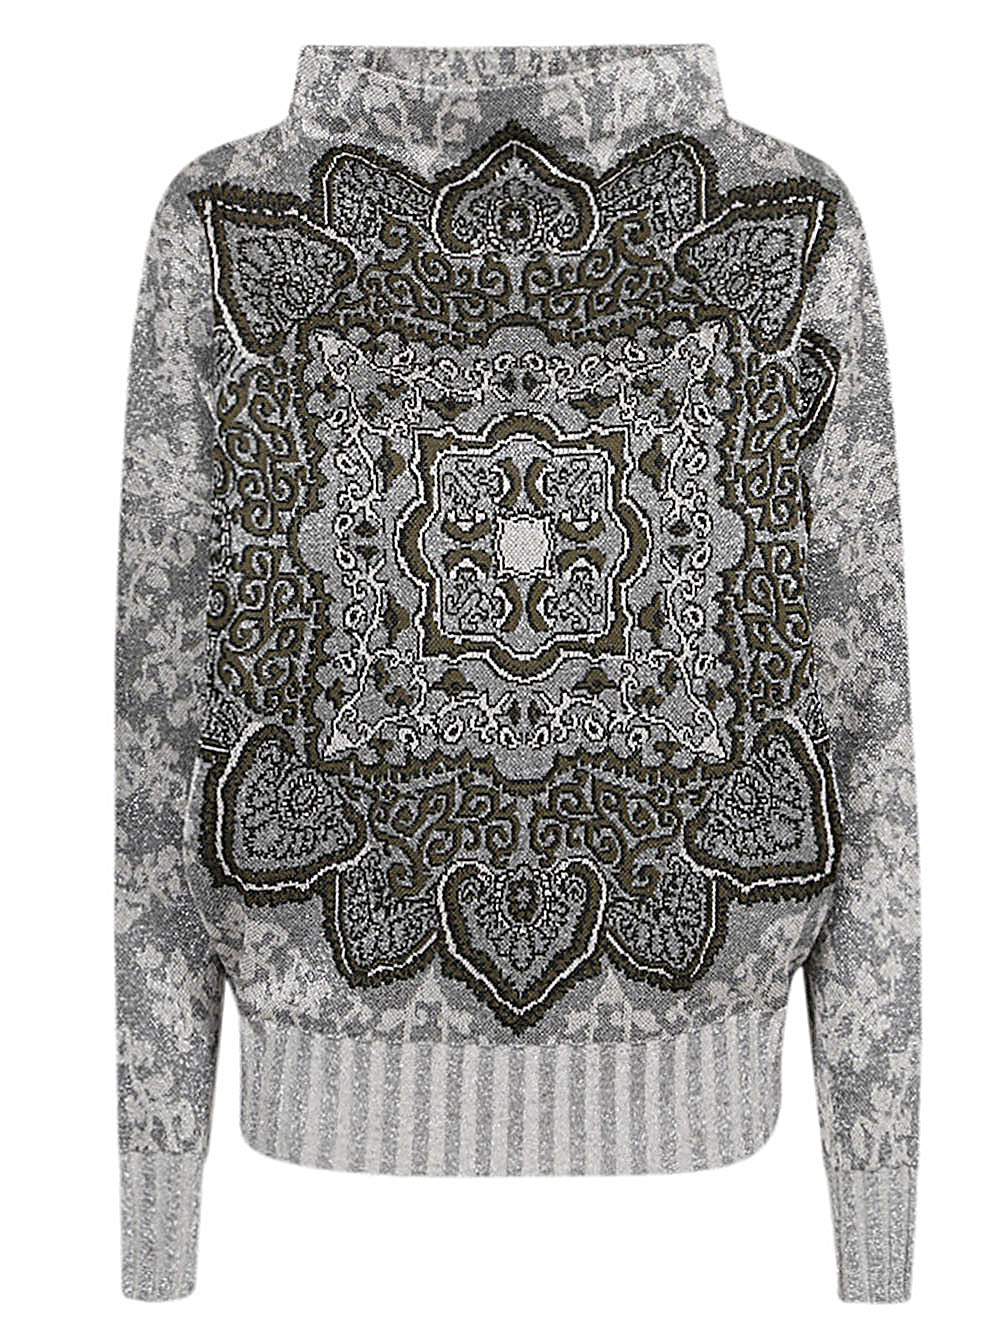 Circus Hotel CIRCUS HOTEL- Embroidered Viscose Turtleneck Sweater